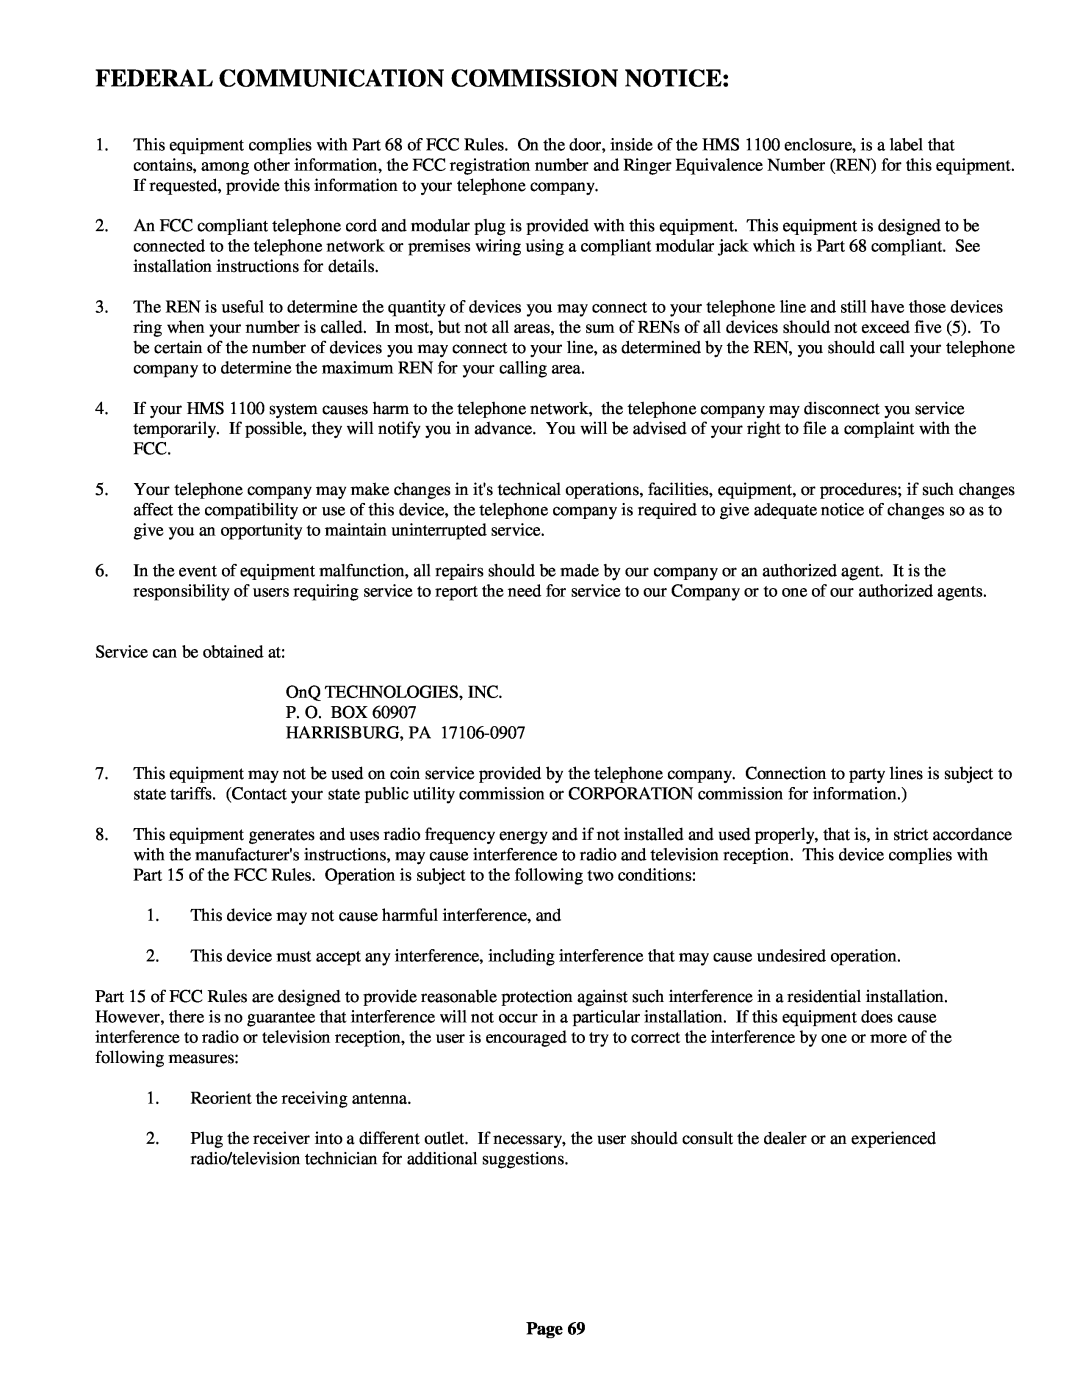 On-Q/Legrand HMS 1100 owner manual Federal Communication Commission Notice, Page 